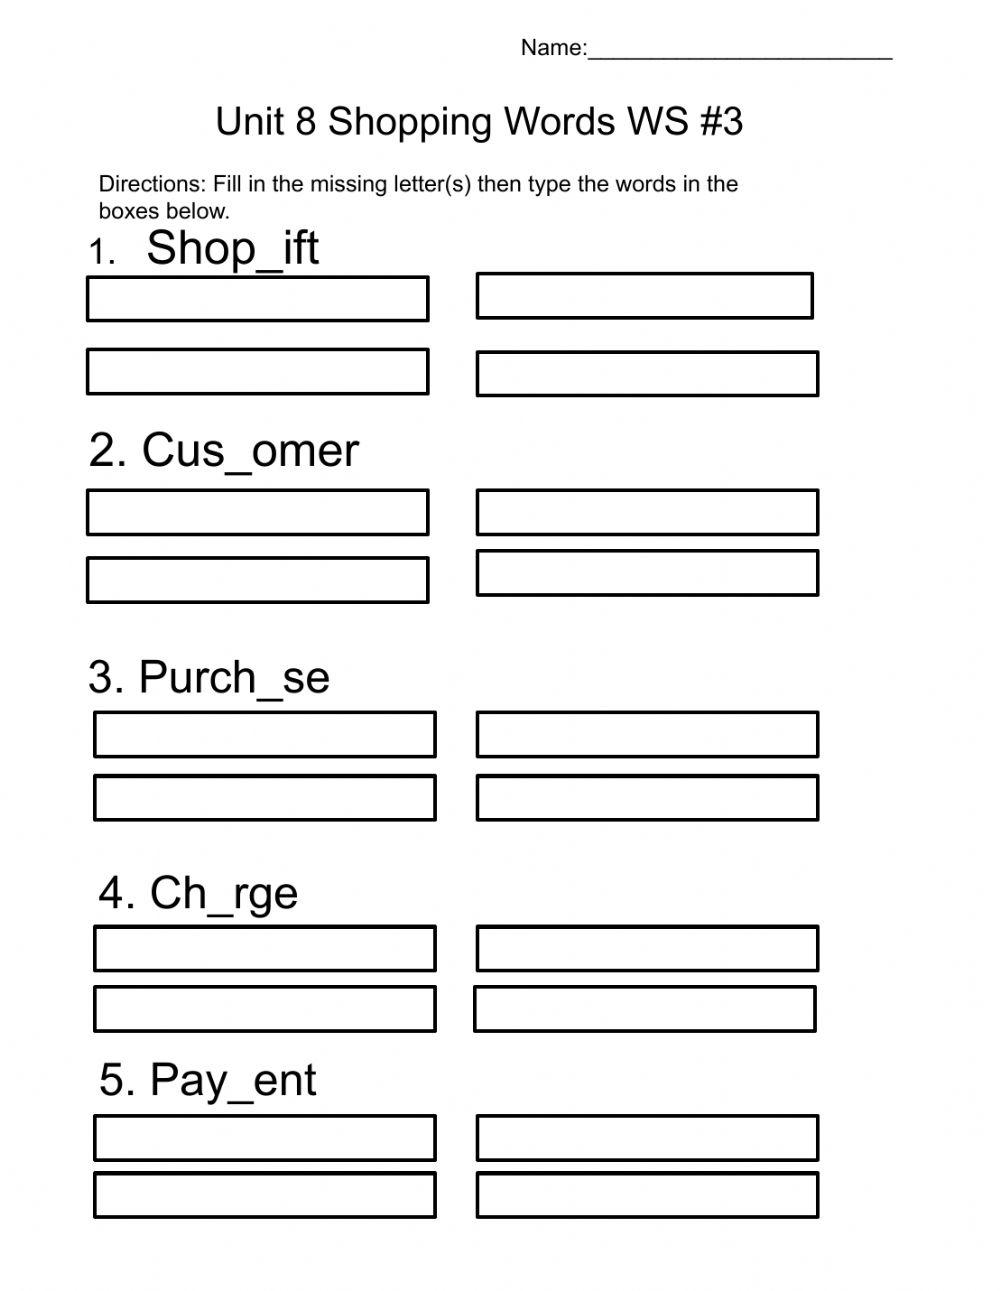 Unit 8 Shopping Words WS-3